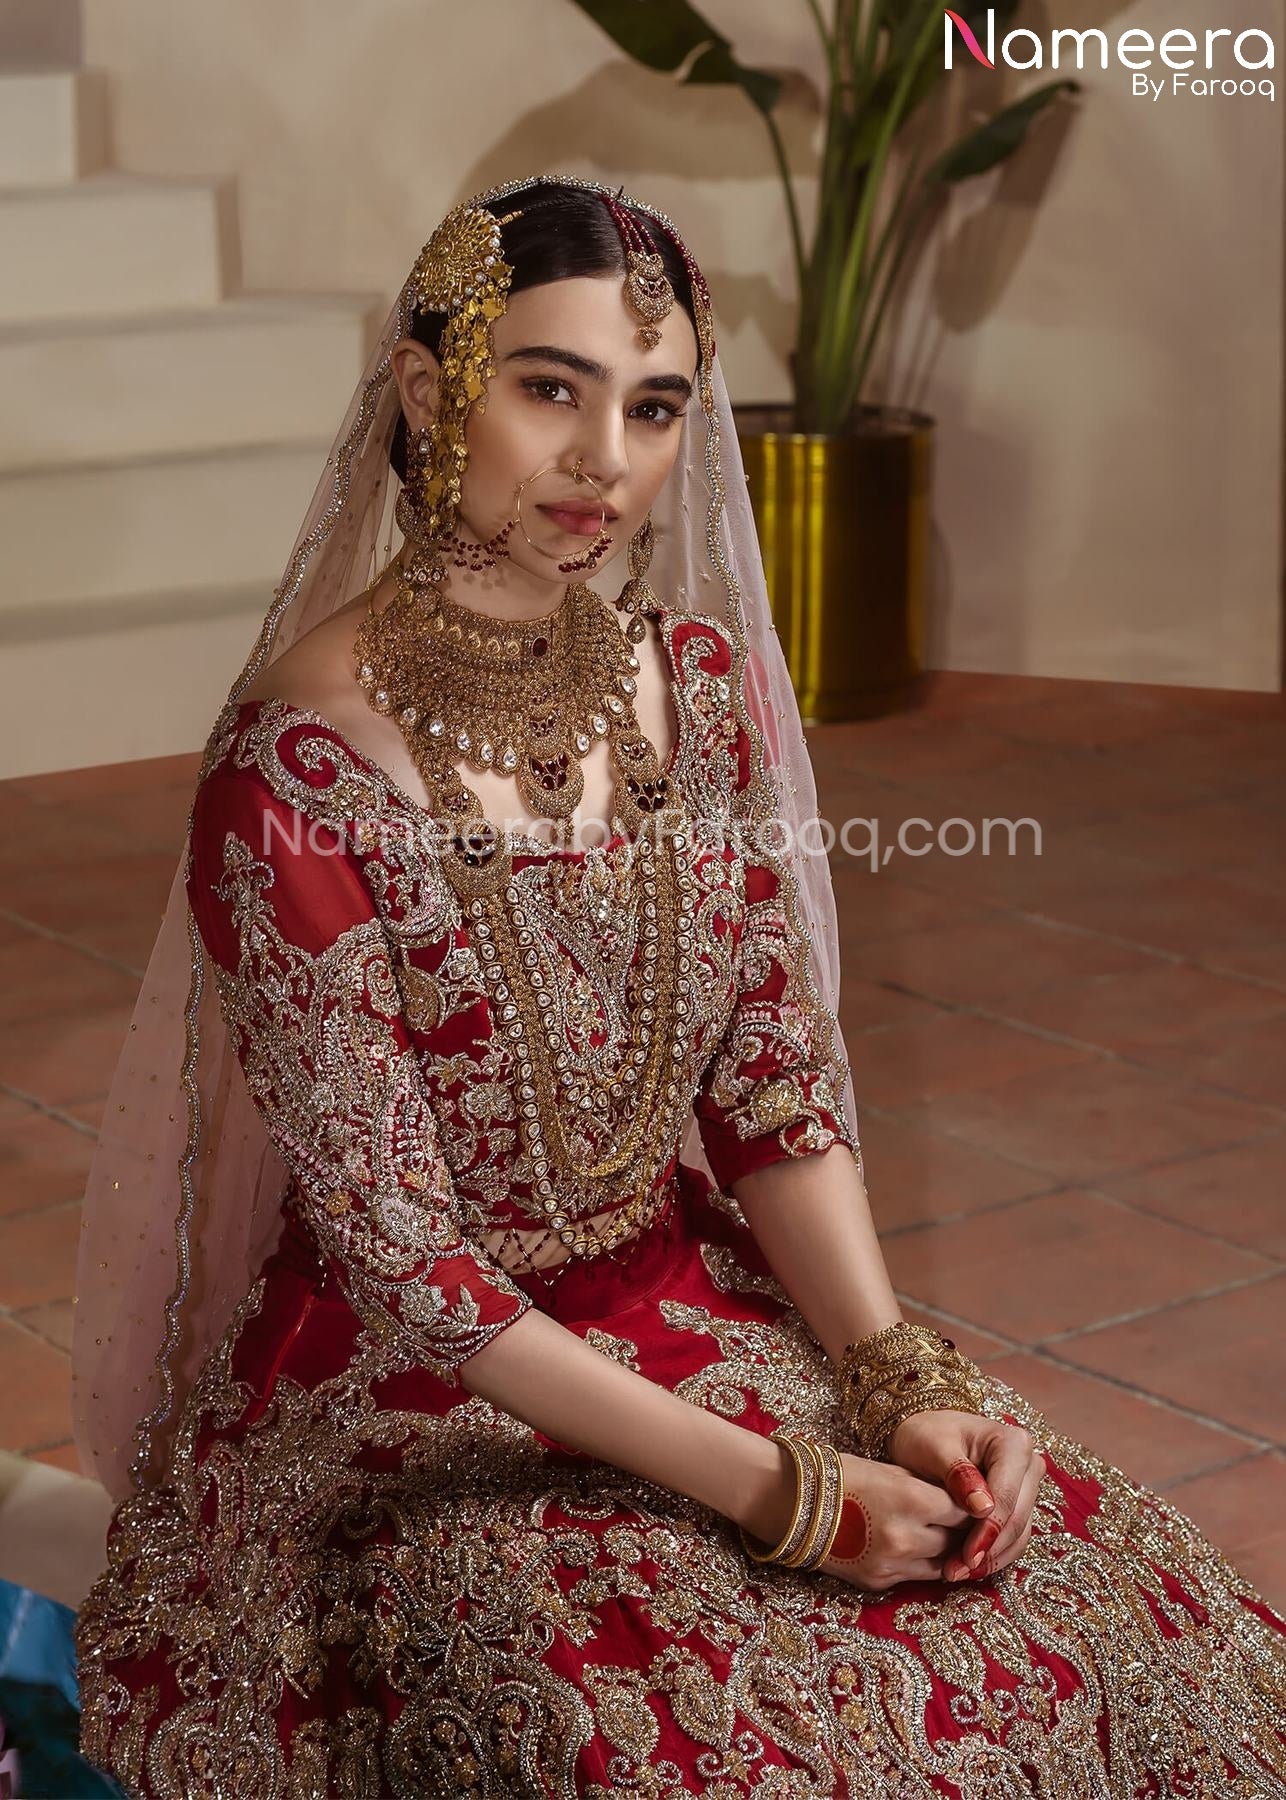 10+ Photos Of Rajasthani Brides That Will Mesmerise You! | Rajasthani bride,  Bride, Bridal lehenga collection